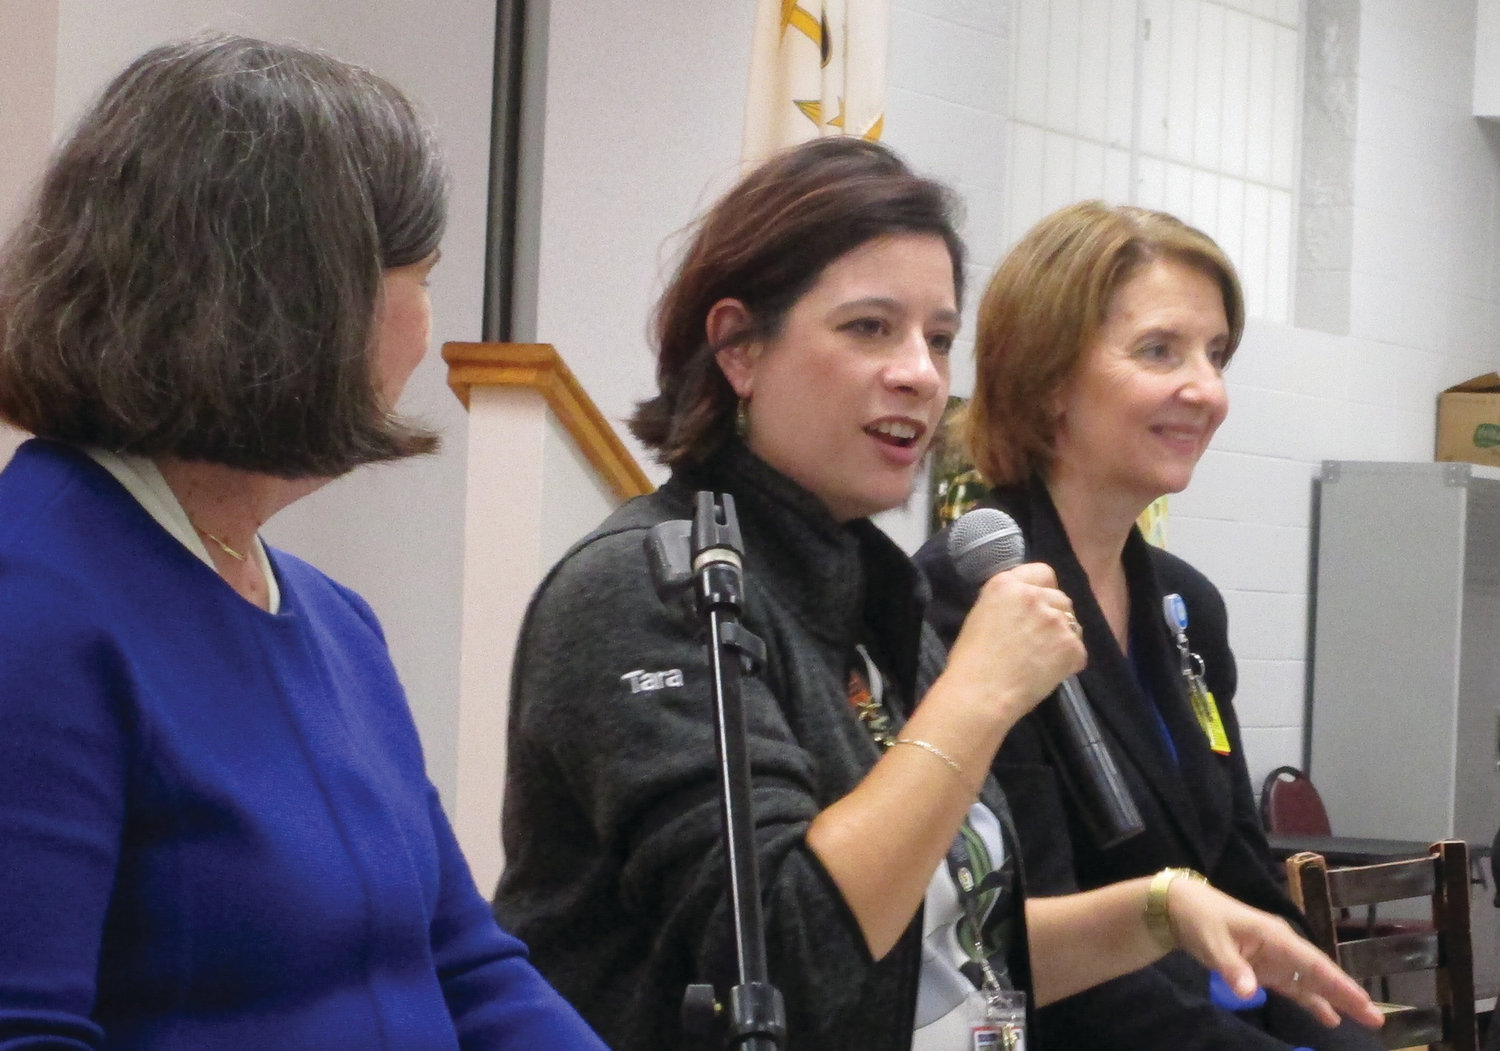 MESSAGE OF HOPE: Tara Tang, outreach coordinator for Butler Hospital’s Memory & Aging Program, speaks during last week’s panel discussion at the Cranston Enrichment Center. Looking on are Catherine Taylor, left, and Terry Fogerty, right.